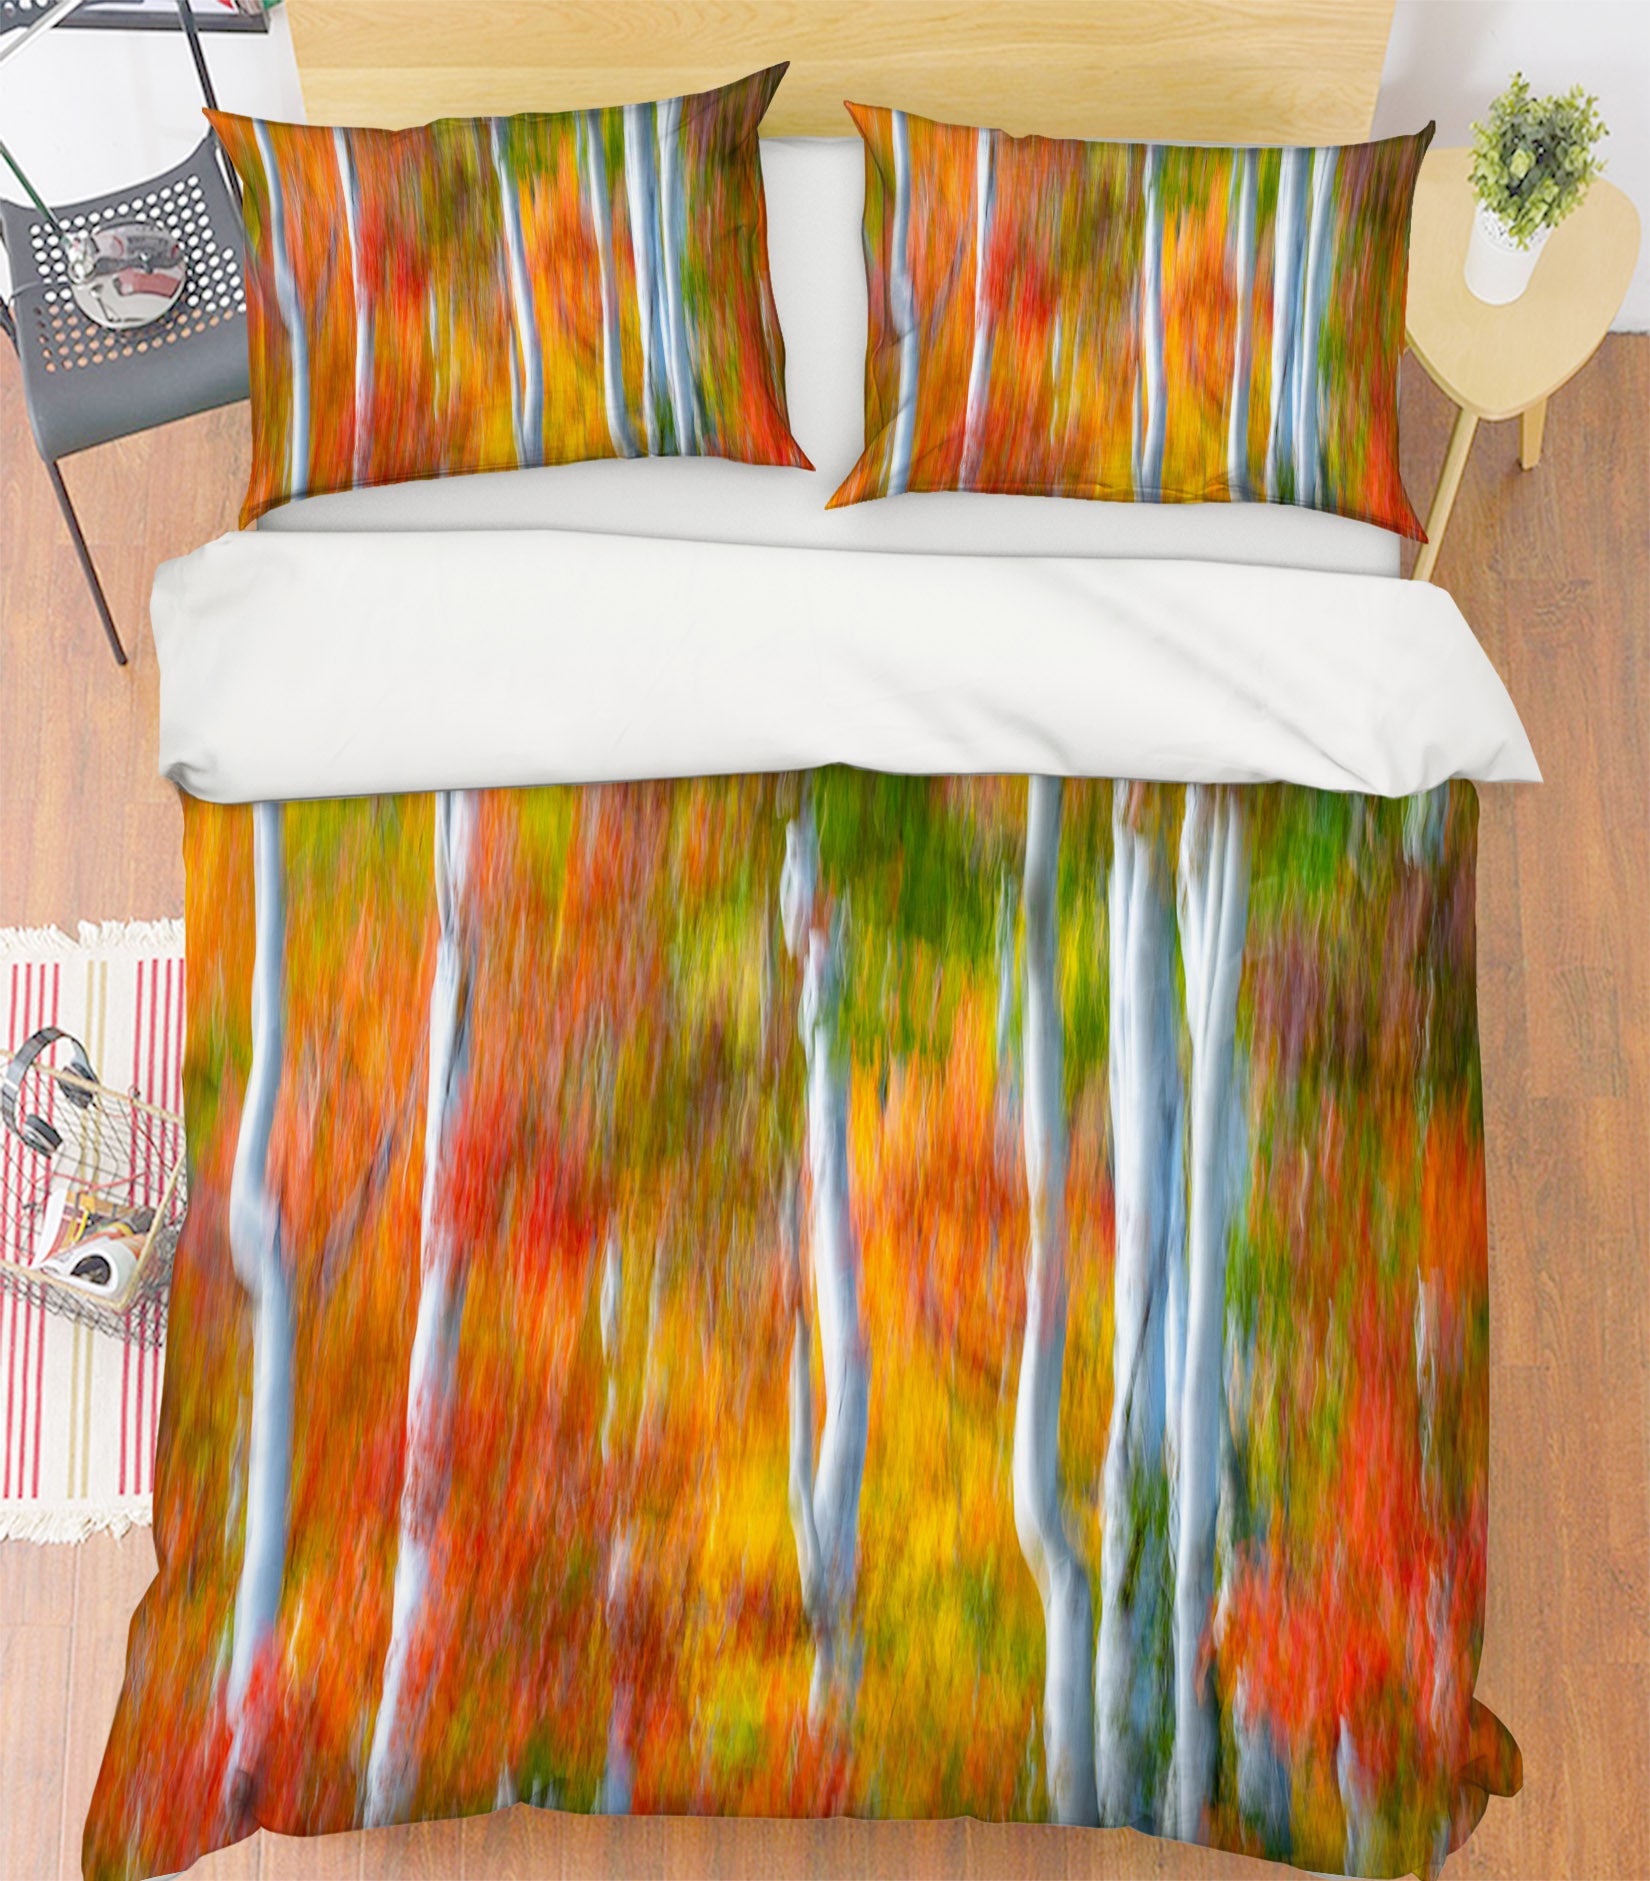 3D Telluride Watercolor 150 Marco Carmassi Bedding Bed Pillowcases Quilt